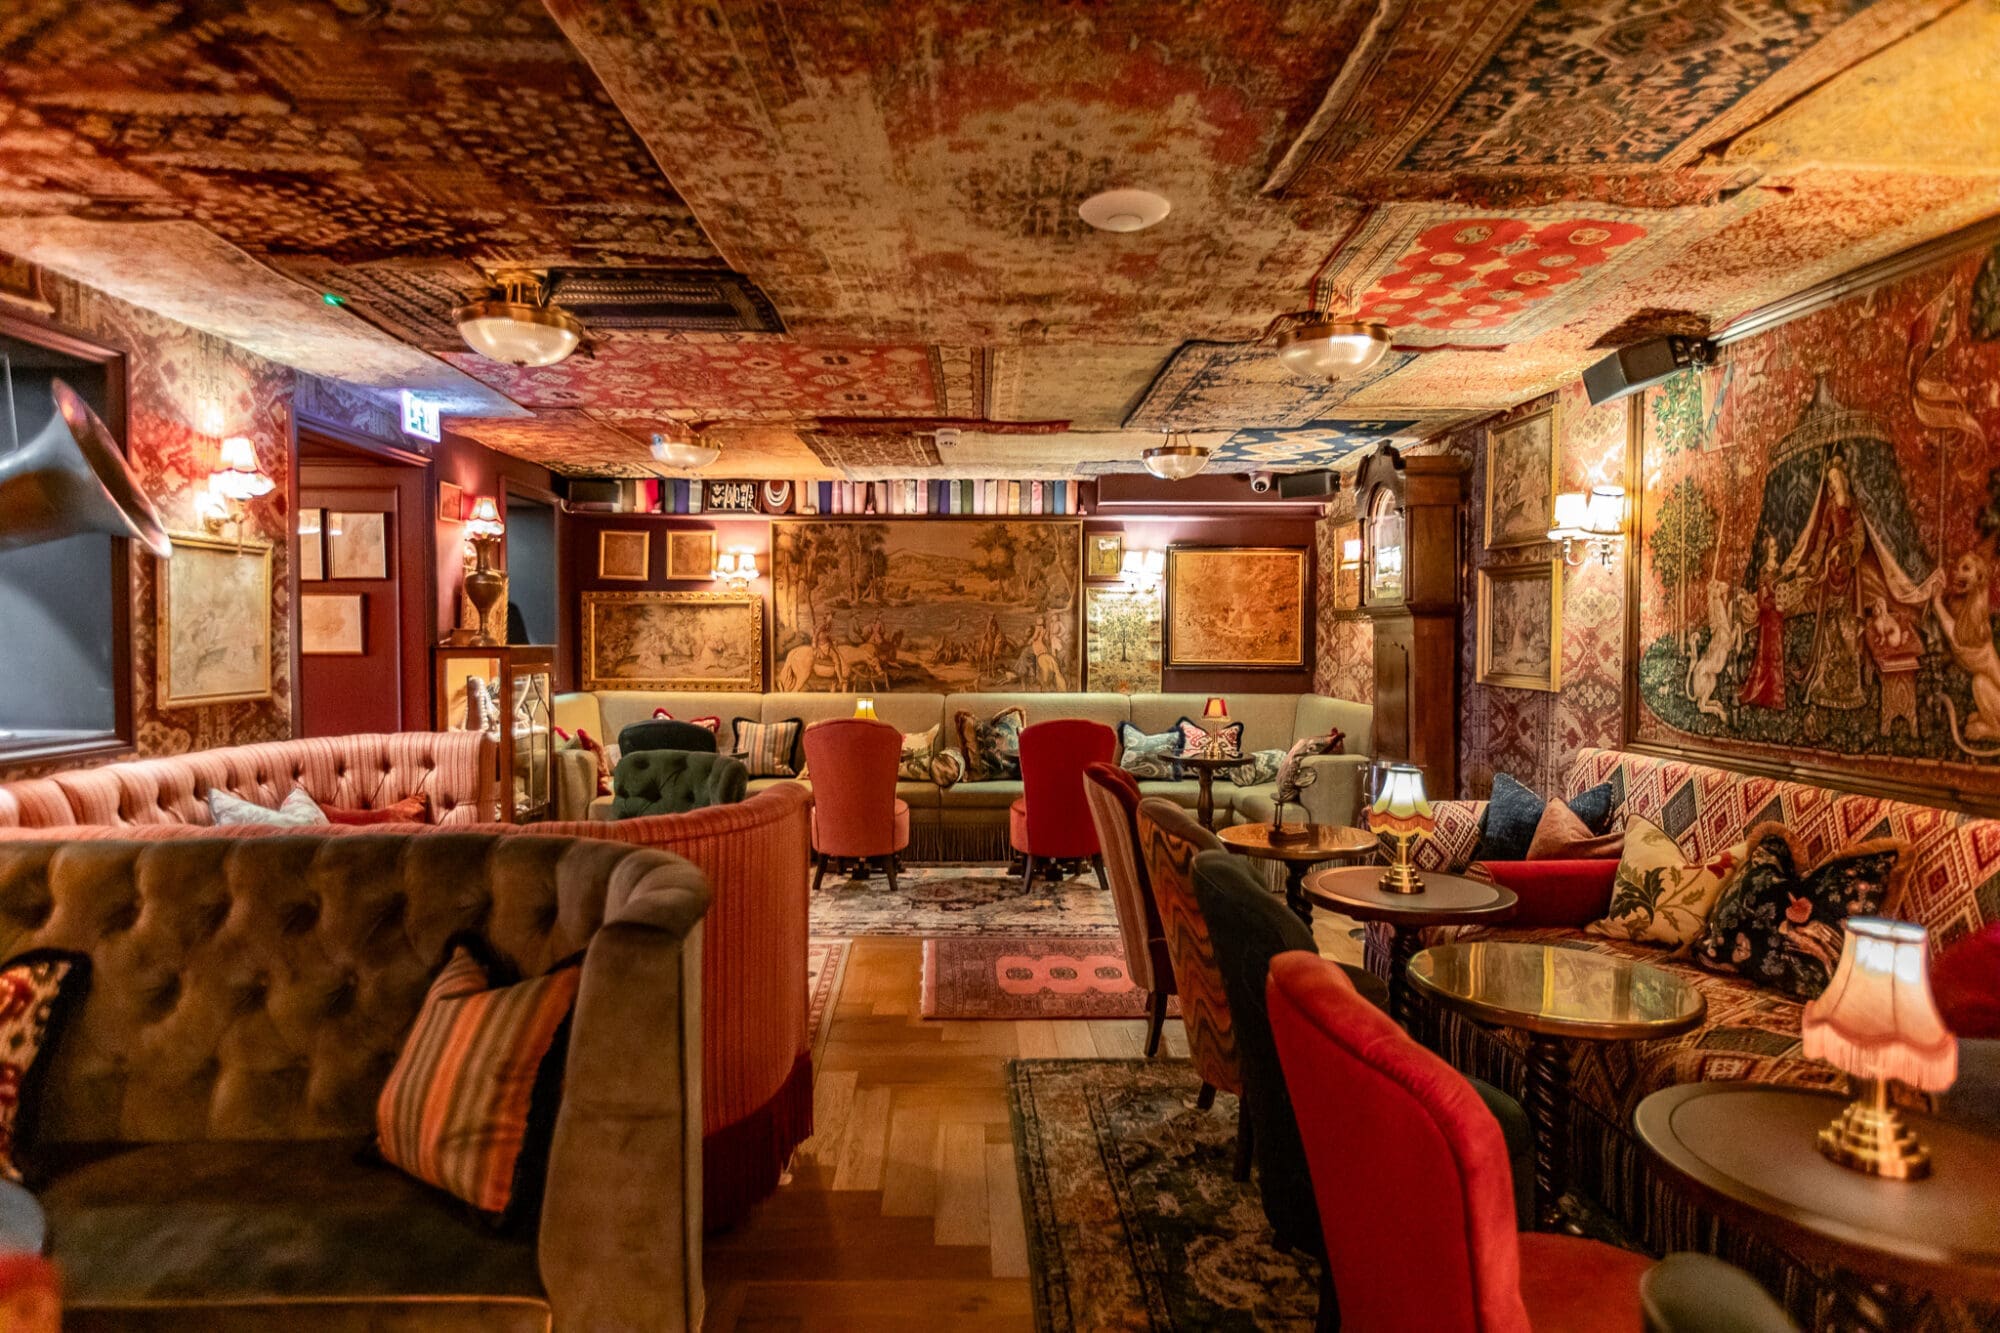 The fabric filled interiors of soho cocktail bar Mr Fogg's pawnbrokers